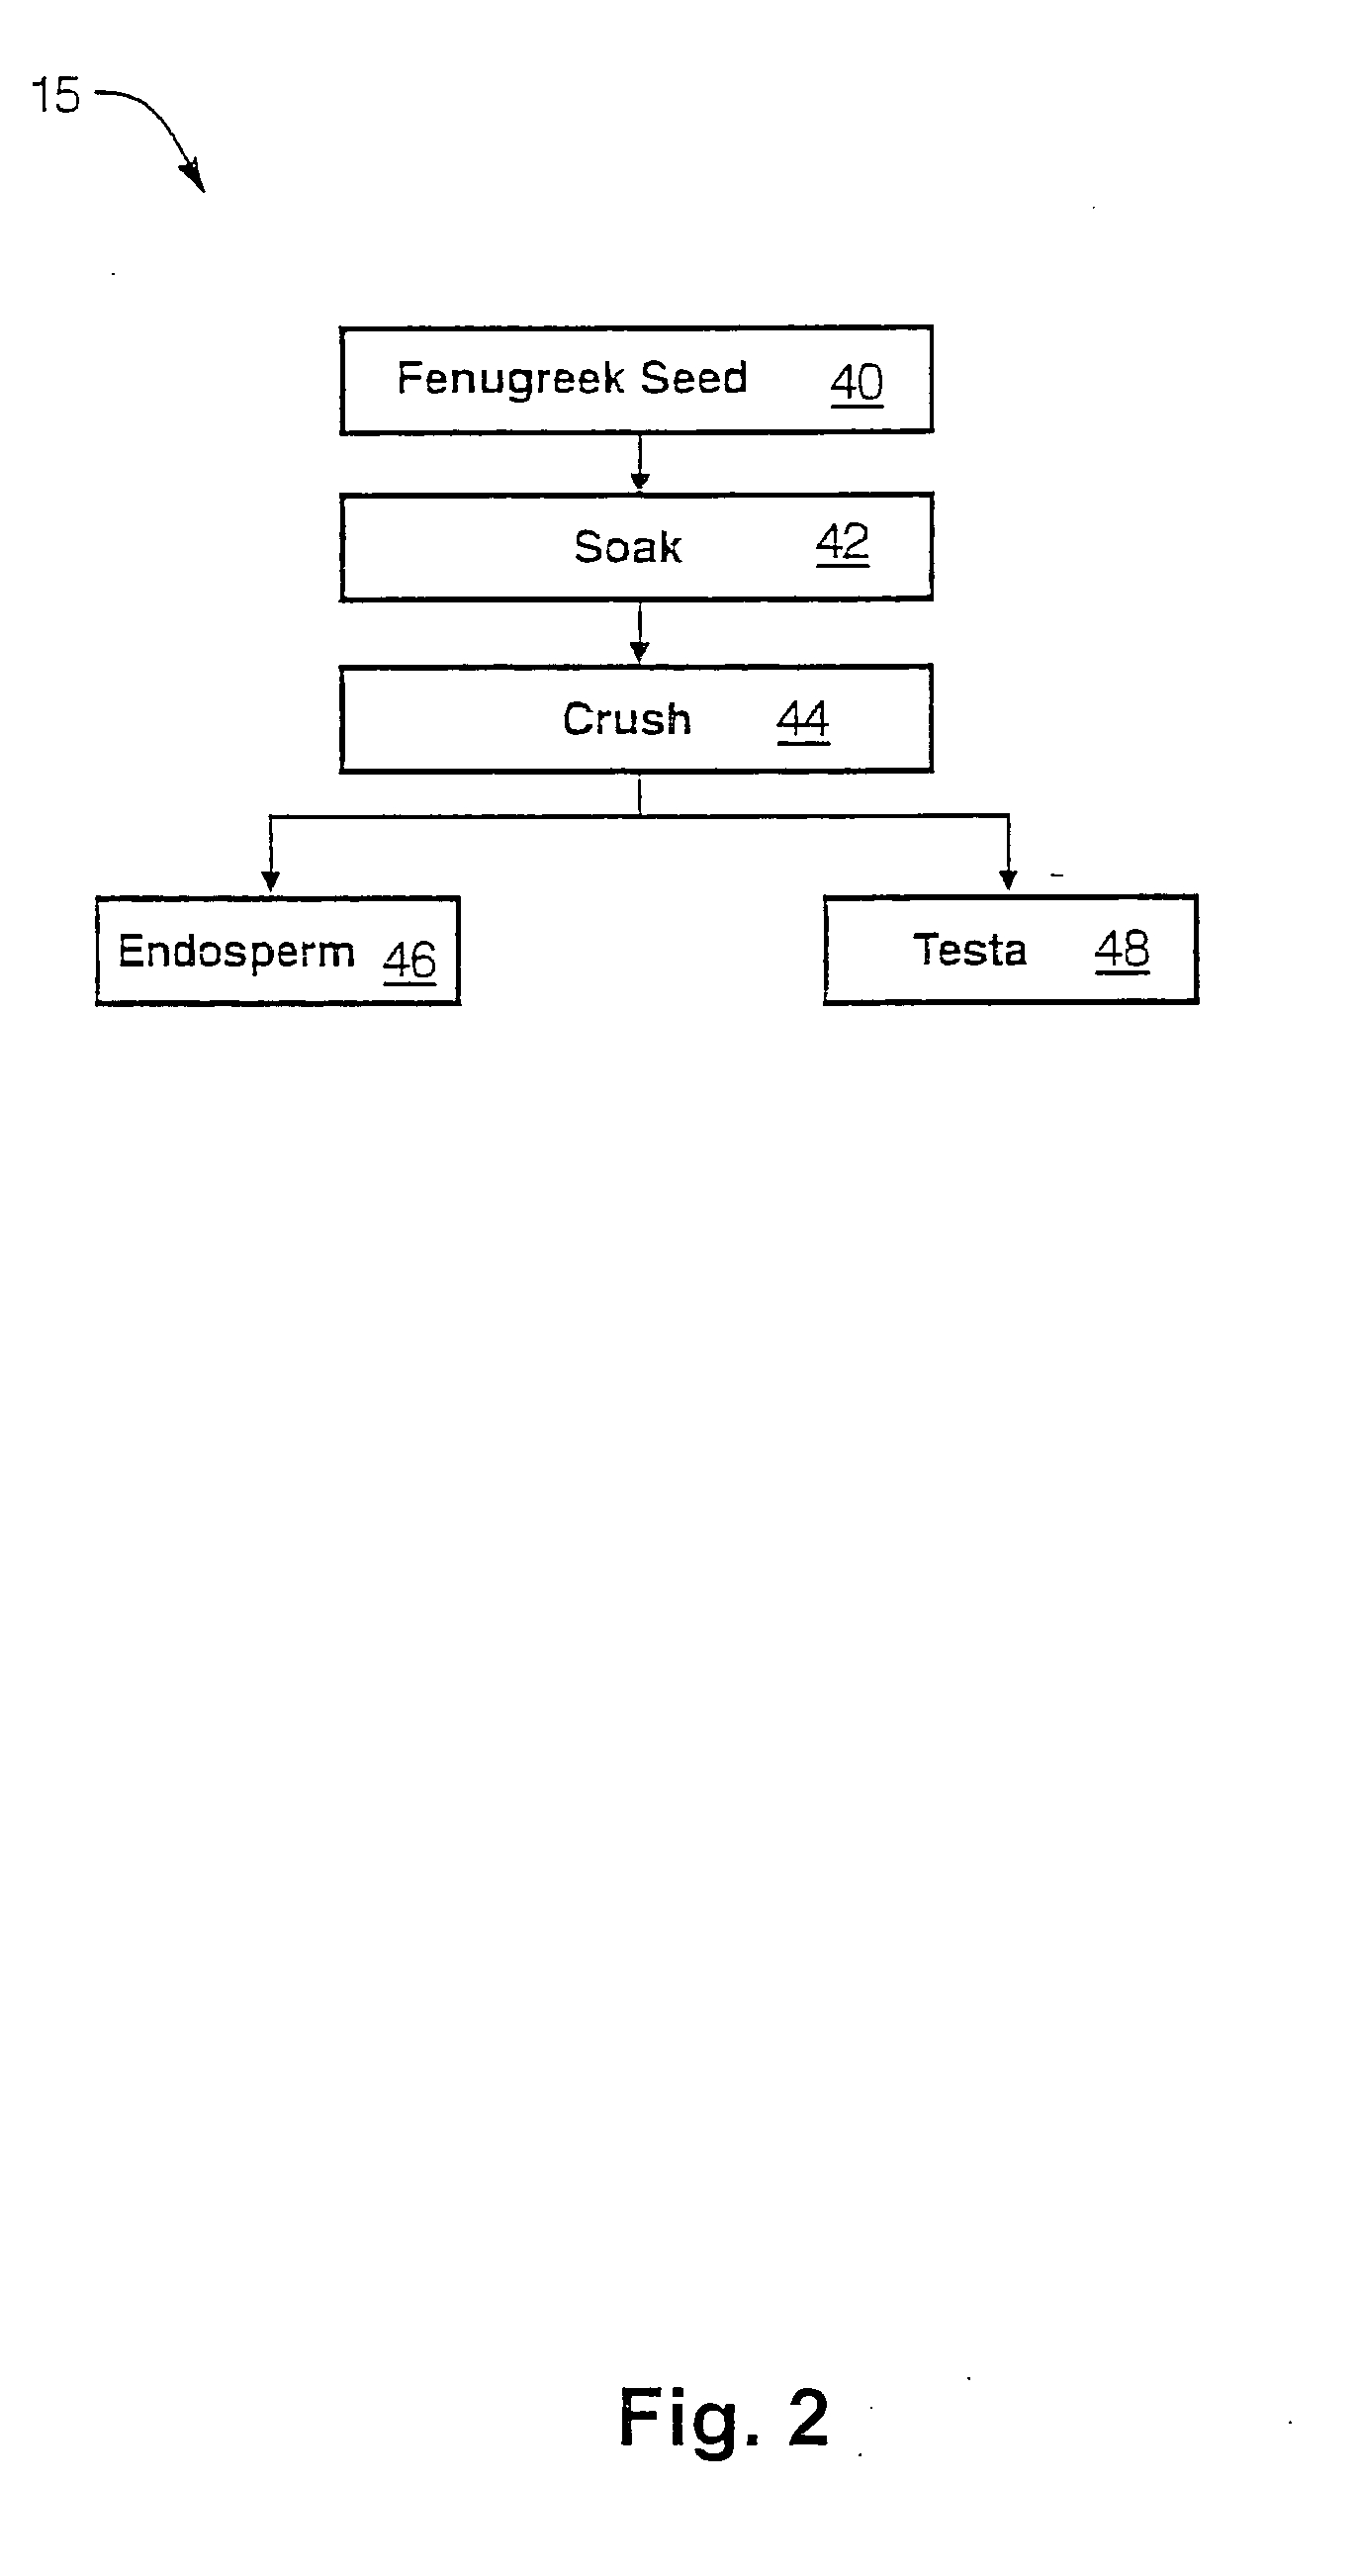 Methods for deriving, isolating, and/or extracting amino acid compositions from Fenugreek seed